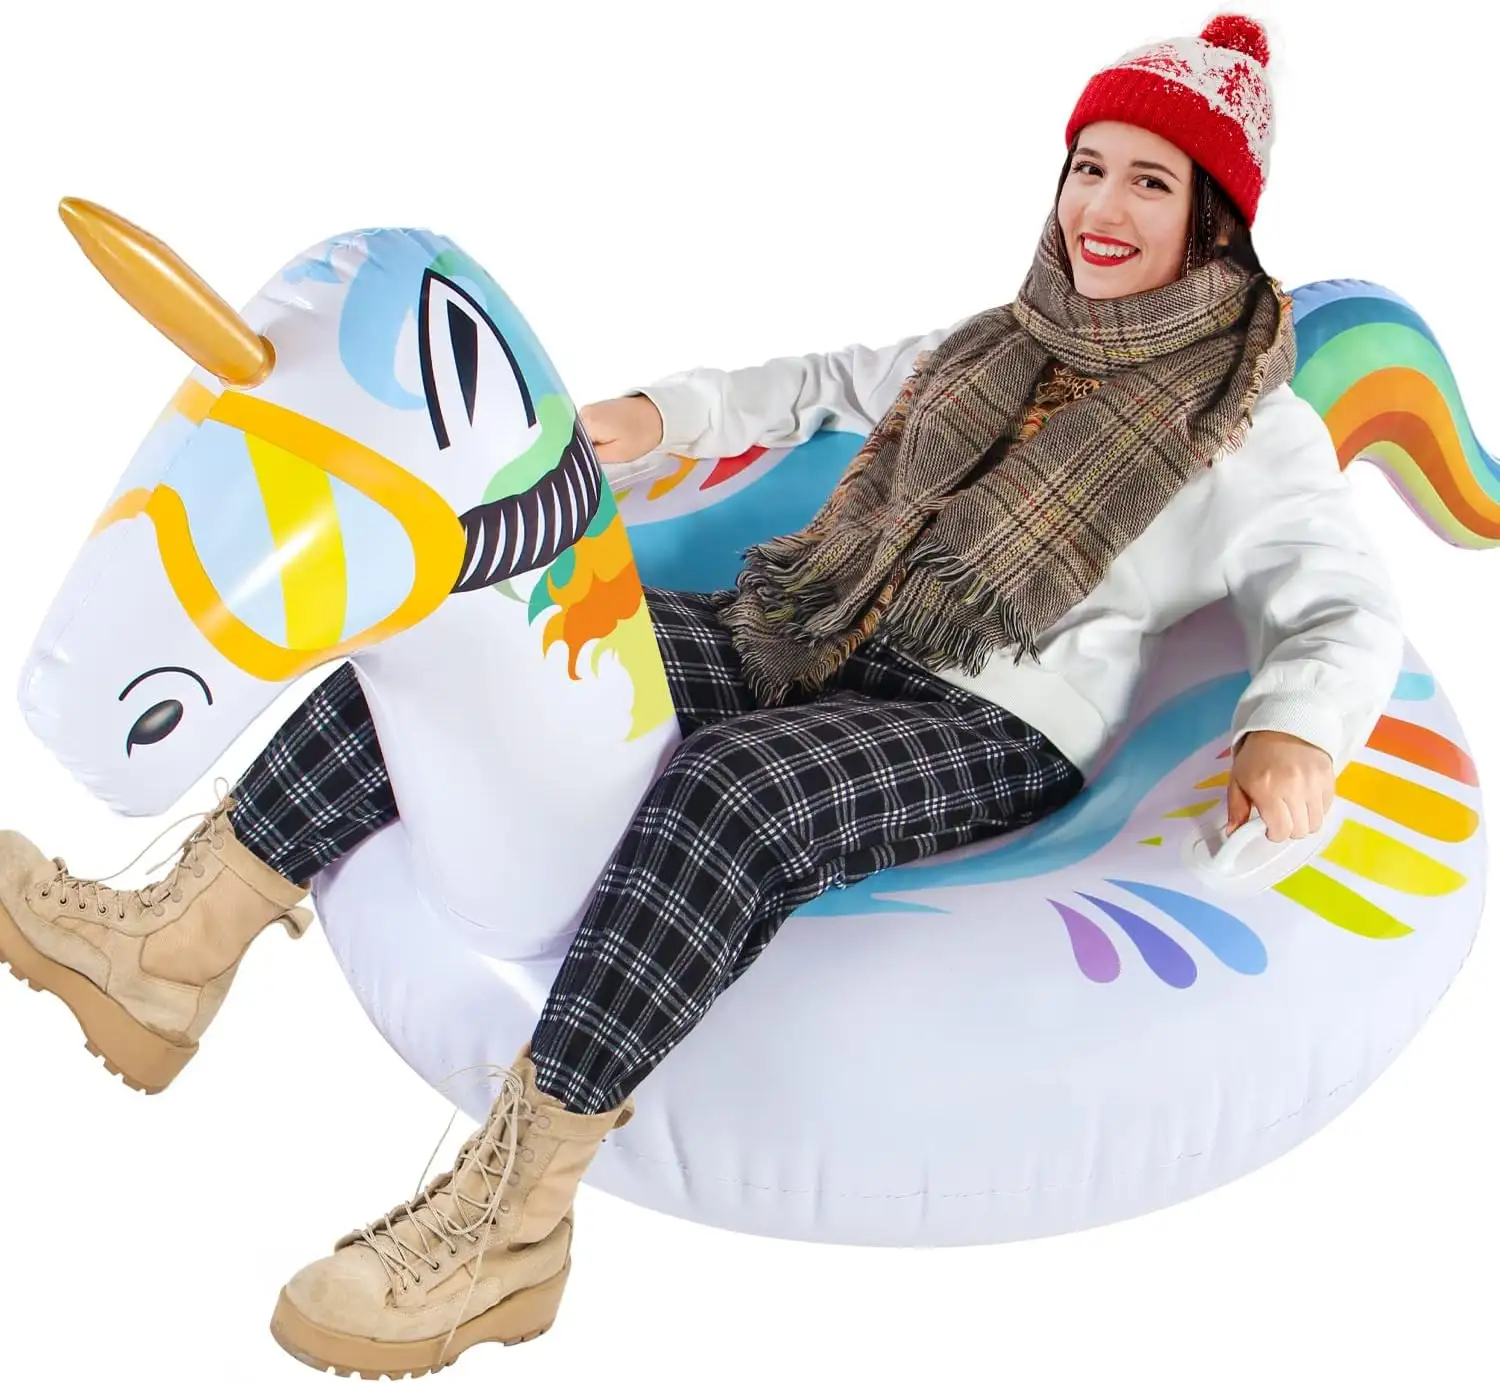 Flamingo | Unicorn Snow Tubes, Large Inflatable Snow Sled with Handles for Adults Outdoor Recreation Sledding